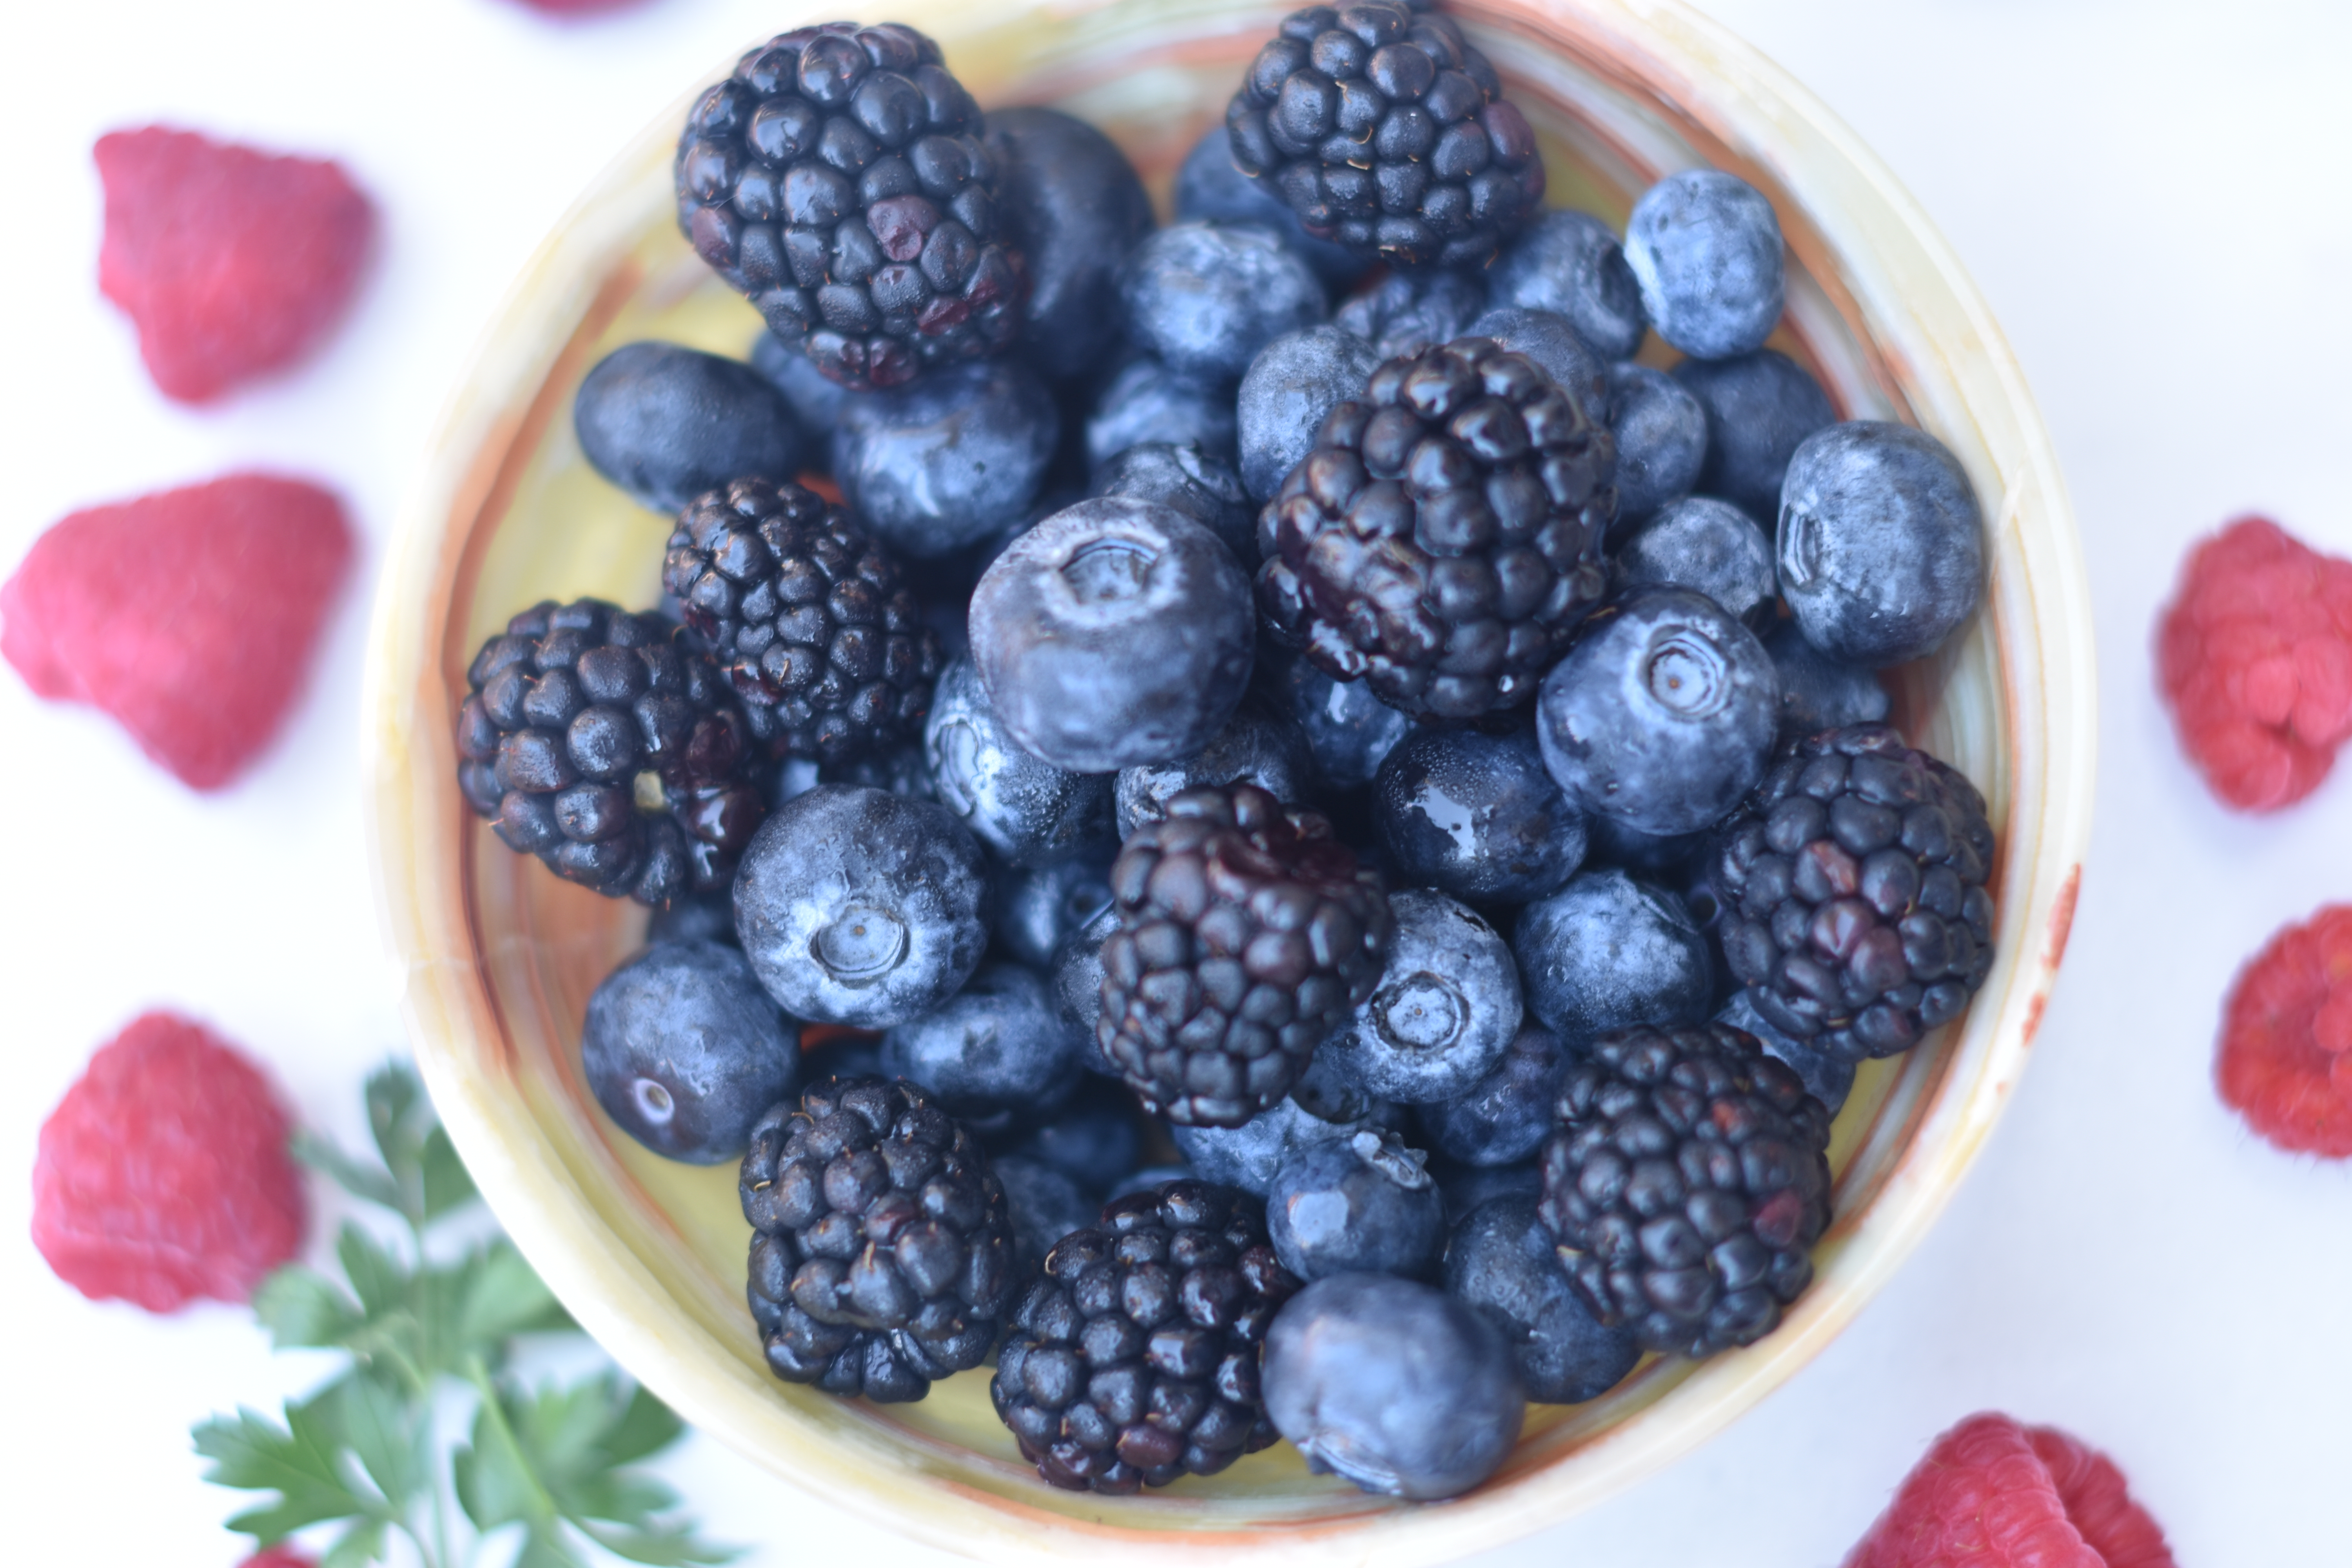 Antioxidant Rich Cancer-fighting berries